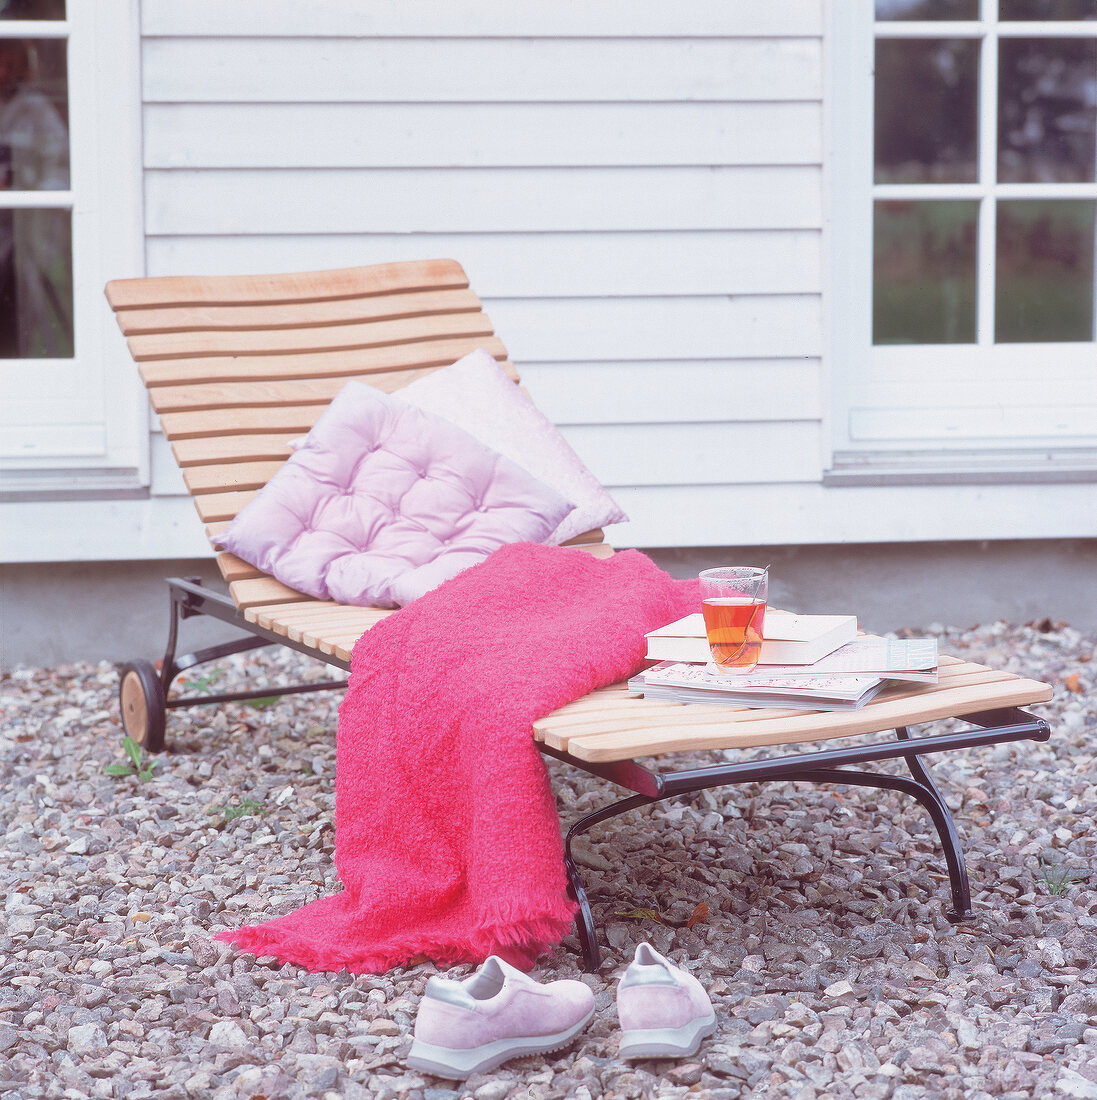 Pink blanket, pillow and sneakers on metal framed wooden deck chair